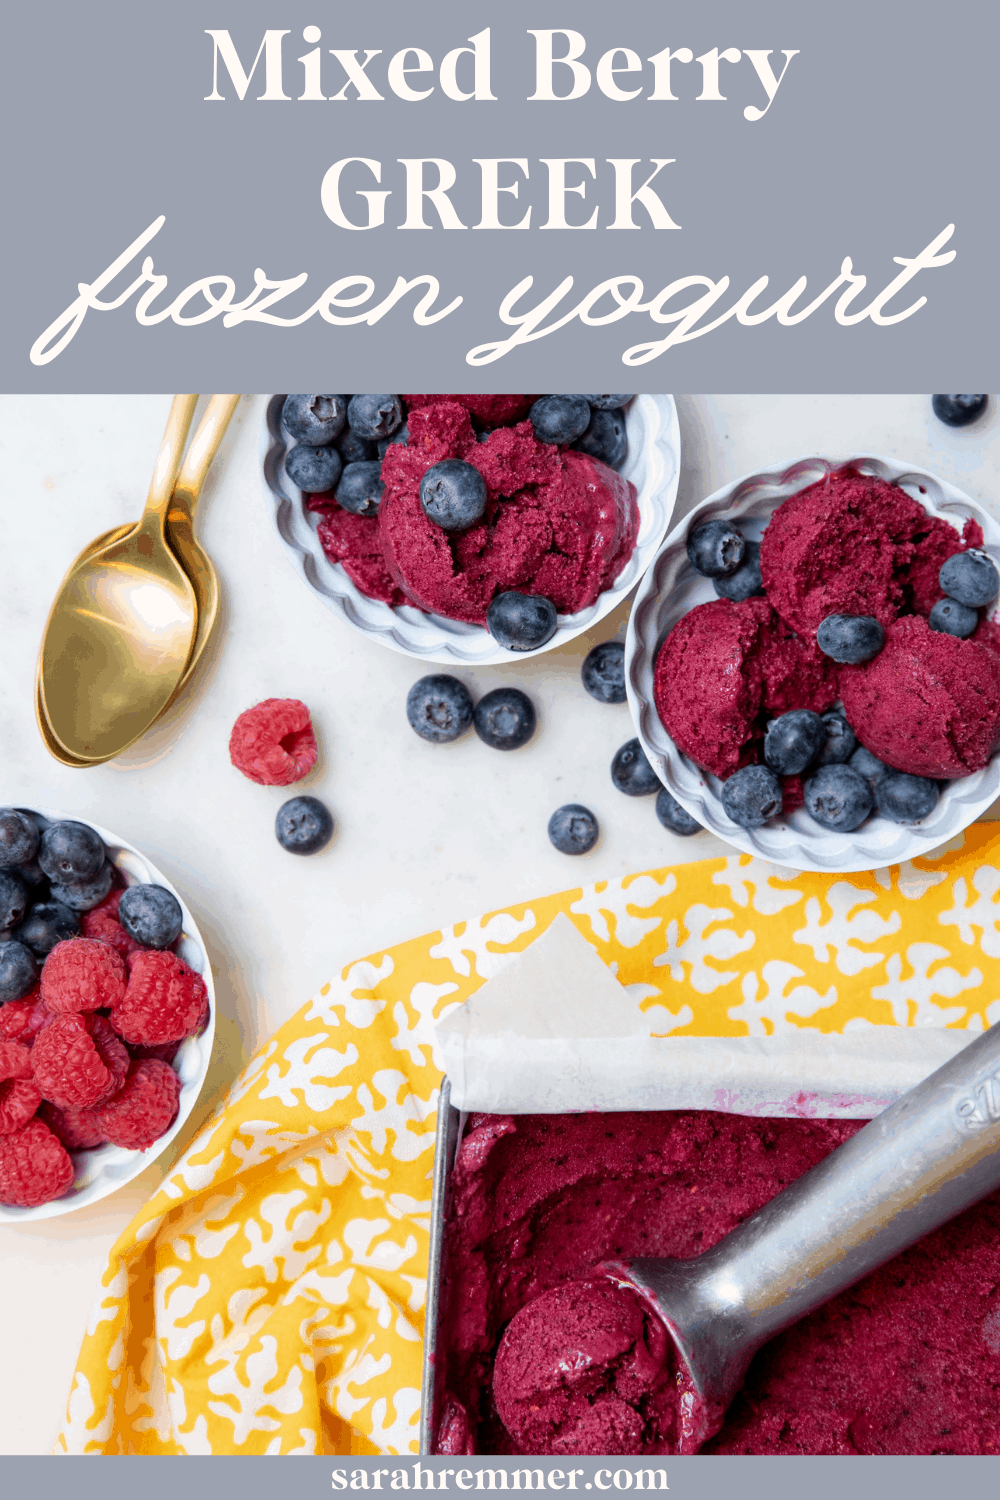 You really don’t need an excuse to create a delicious frozen Greek yogurt recipe! Who doesn’t love a frozen treat?! Not to mention...what mom doesn’t love when it’s both kid-approved AND nutritious?! This registered dietitian sure does.